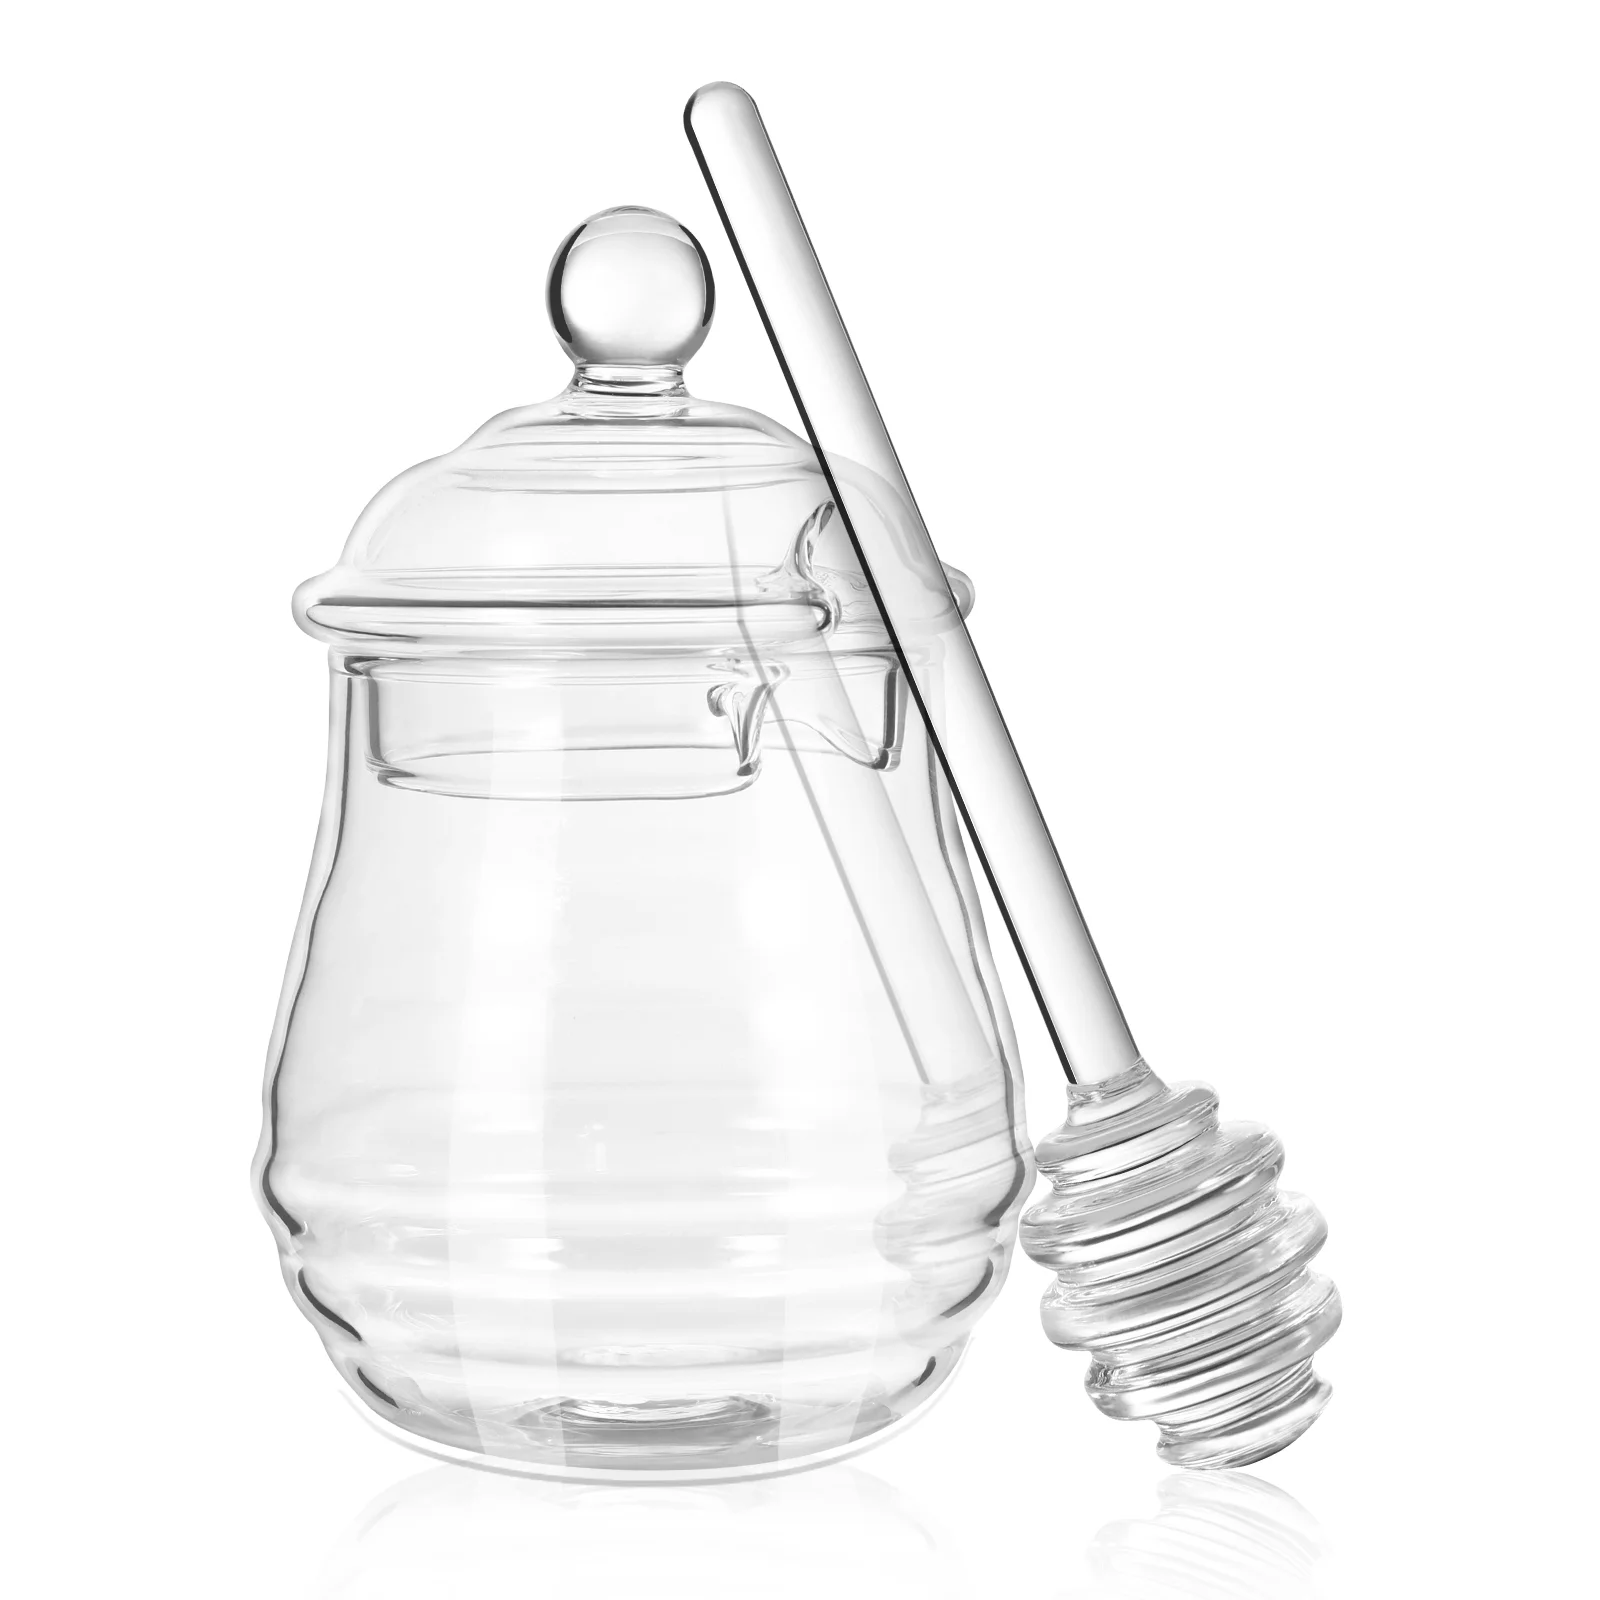 Honey Pot Dipper Withjars Dispenser Canisters Cookie Jar Gifts Honeypot Decorcontainers Acrylic Set Lids The Hashanah Rosh